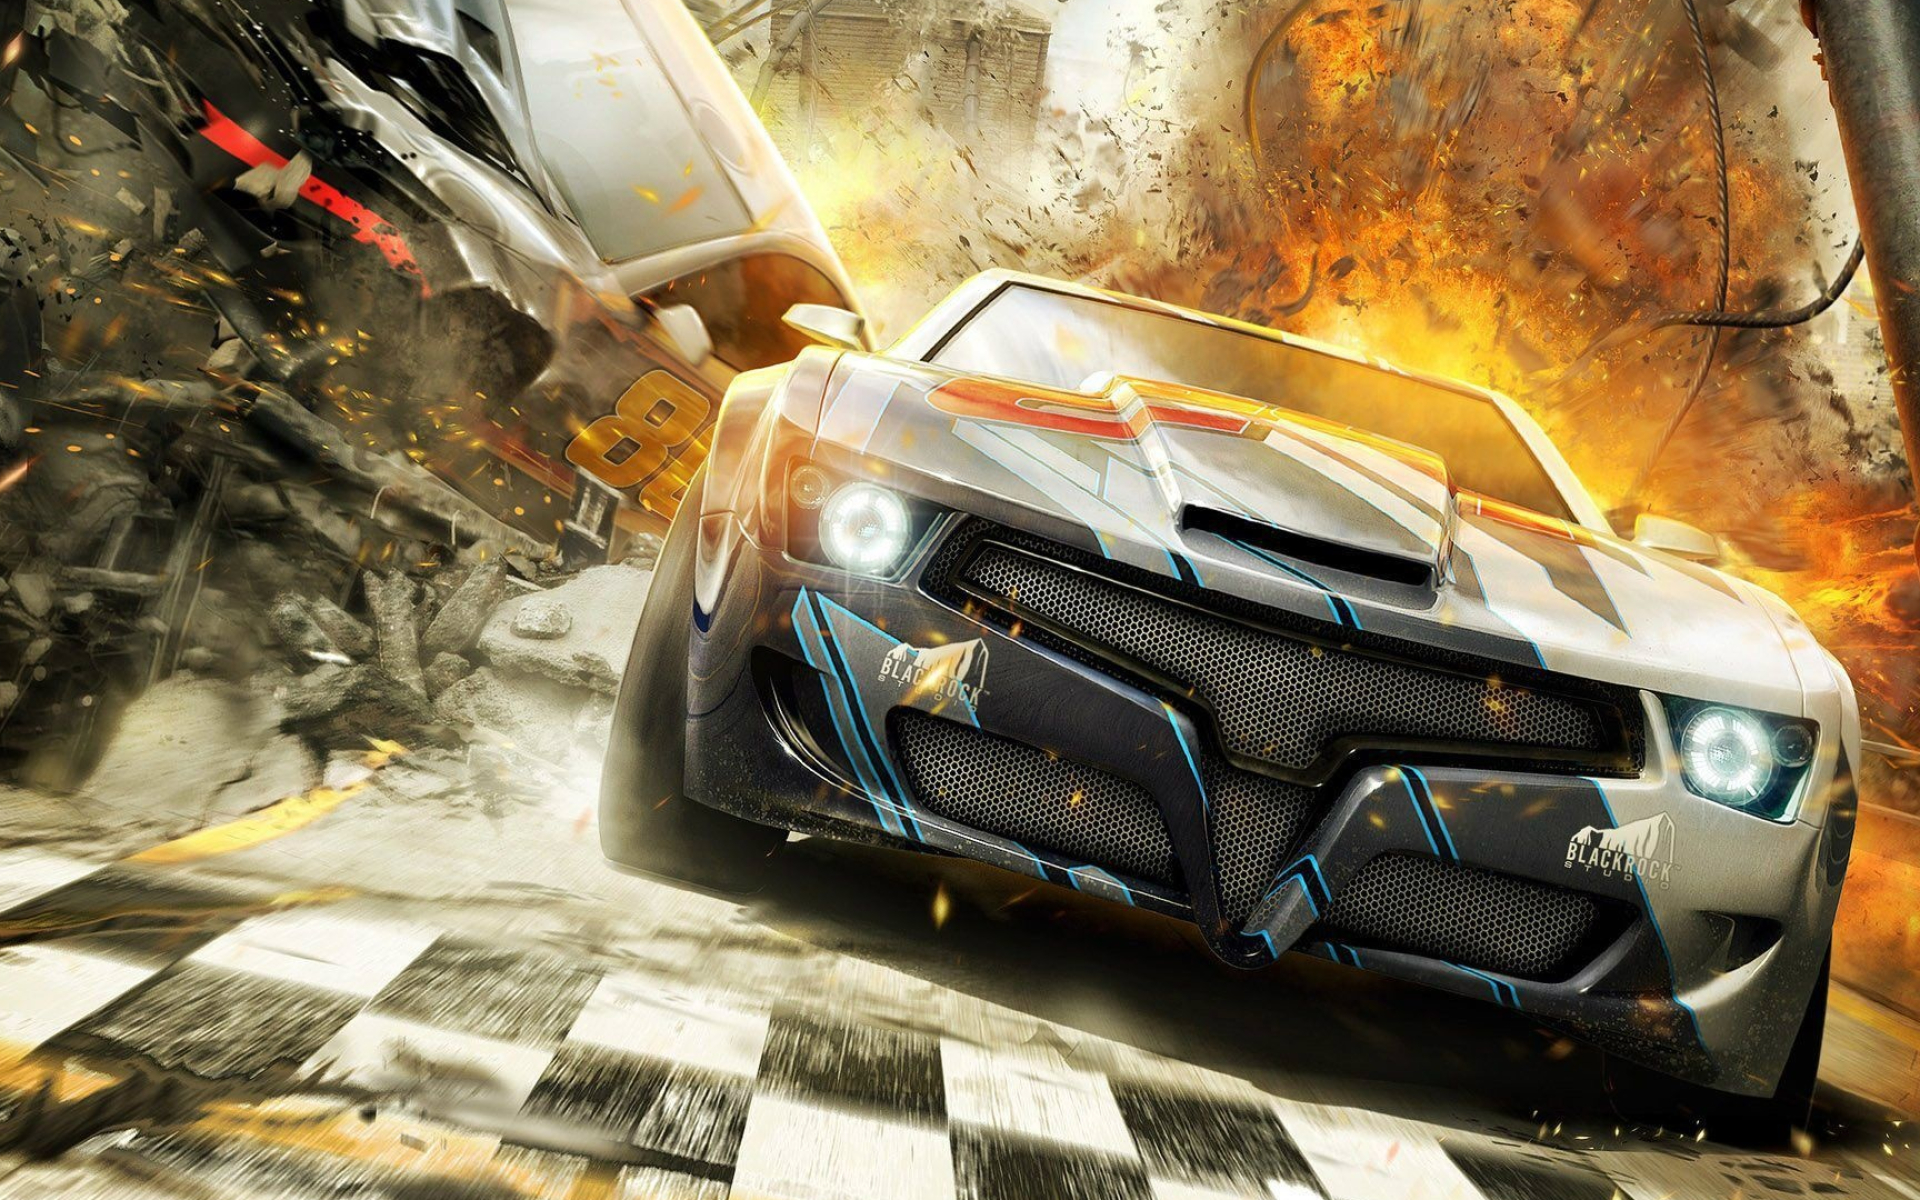 Racing Game, Backgrounds of racing games, Immersive gaming experience, Thrilling gameplay, 1920x1200 HD Desktop